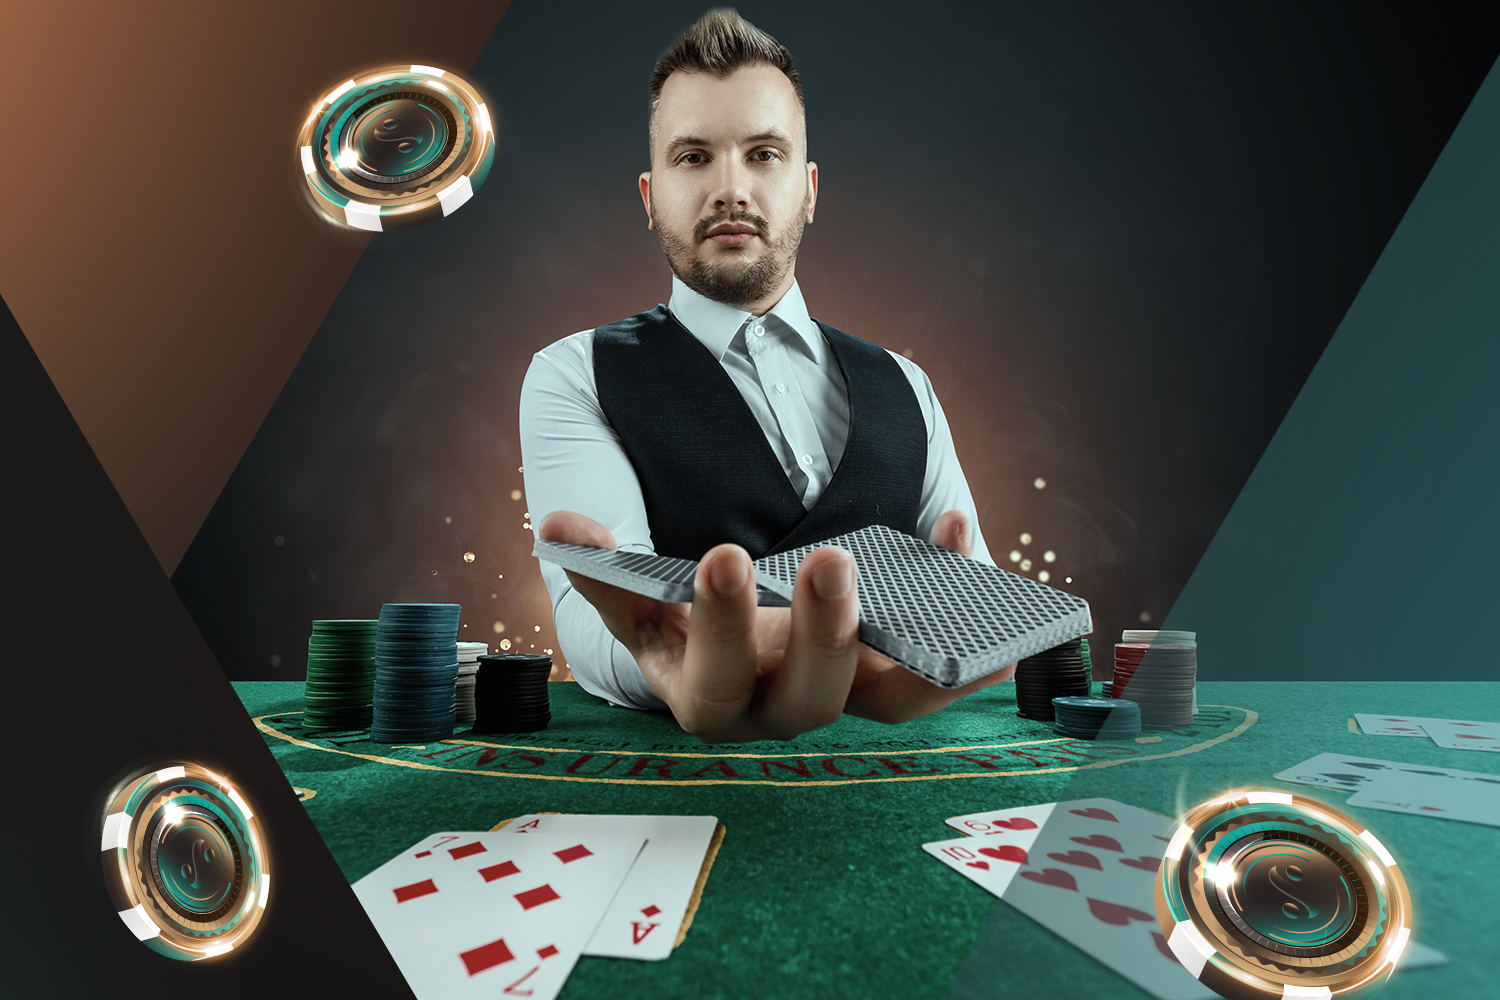 Congratulations! Your Comparing Brazilian Online Casino Platforms: Finding the Top Choice Is About To Stop Being Relevant